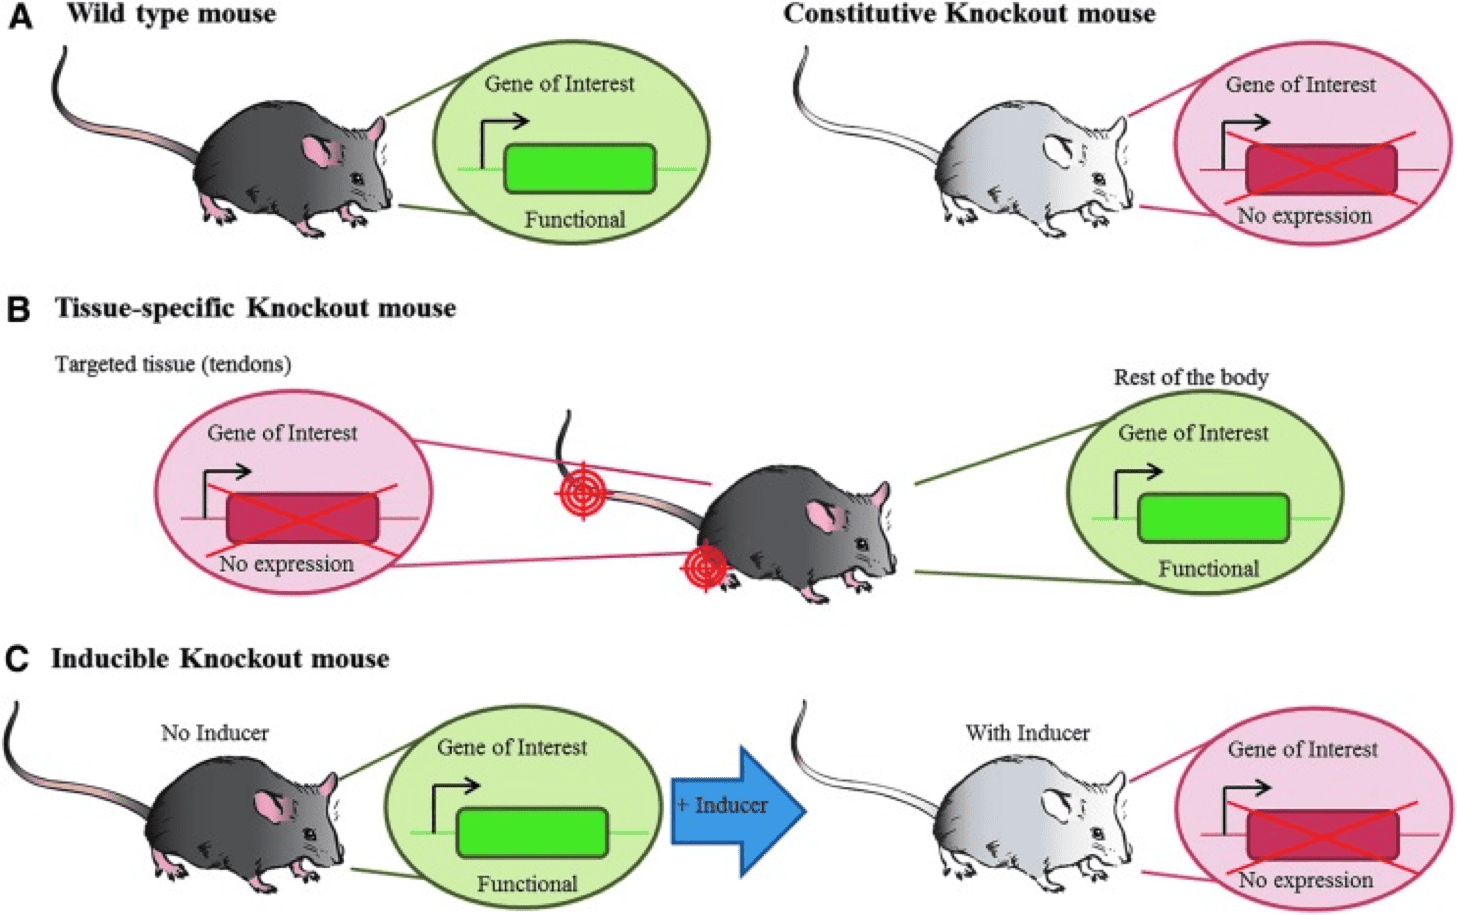 Visual explanation on the different types of knockout mice used in research labs